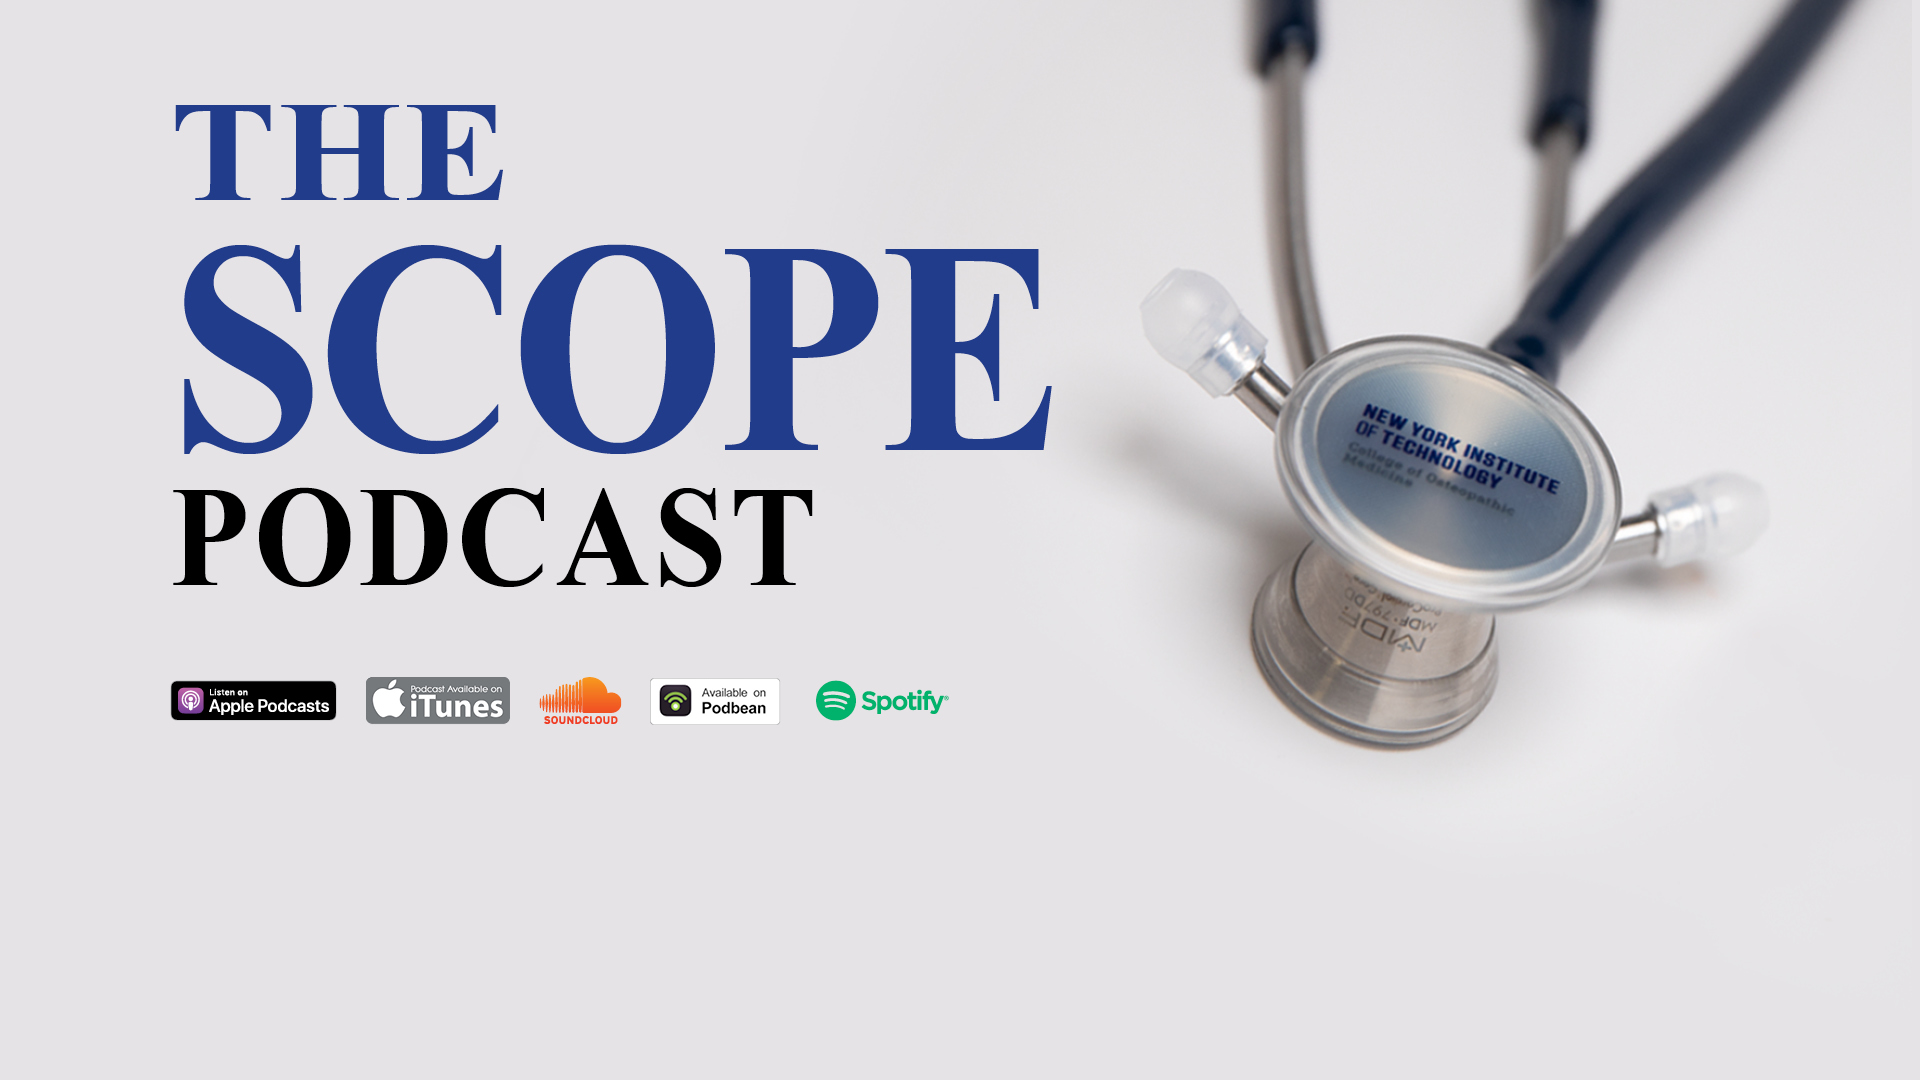 The Scope Podcast